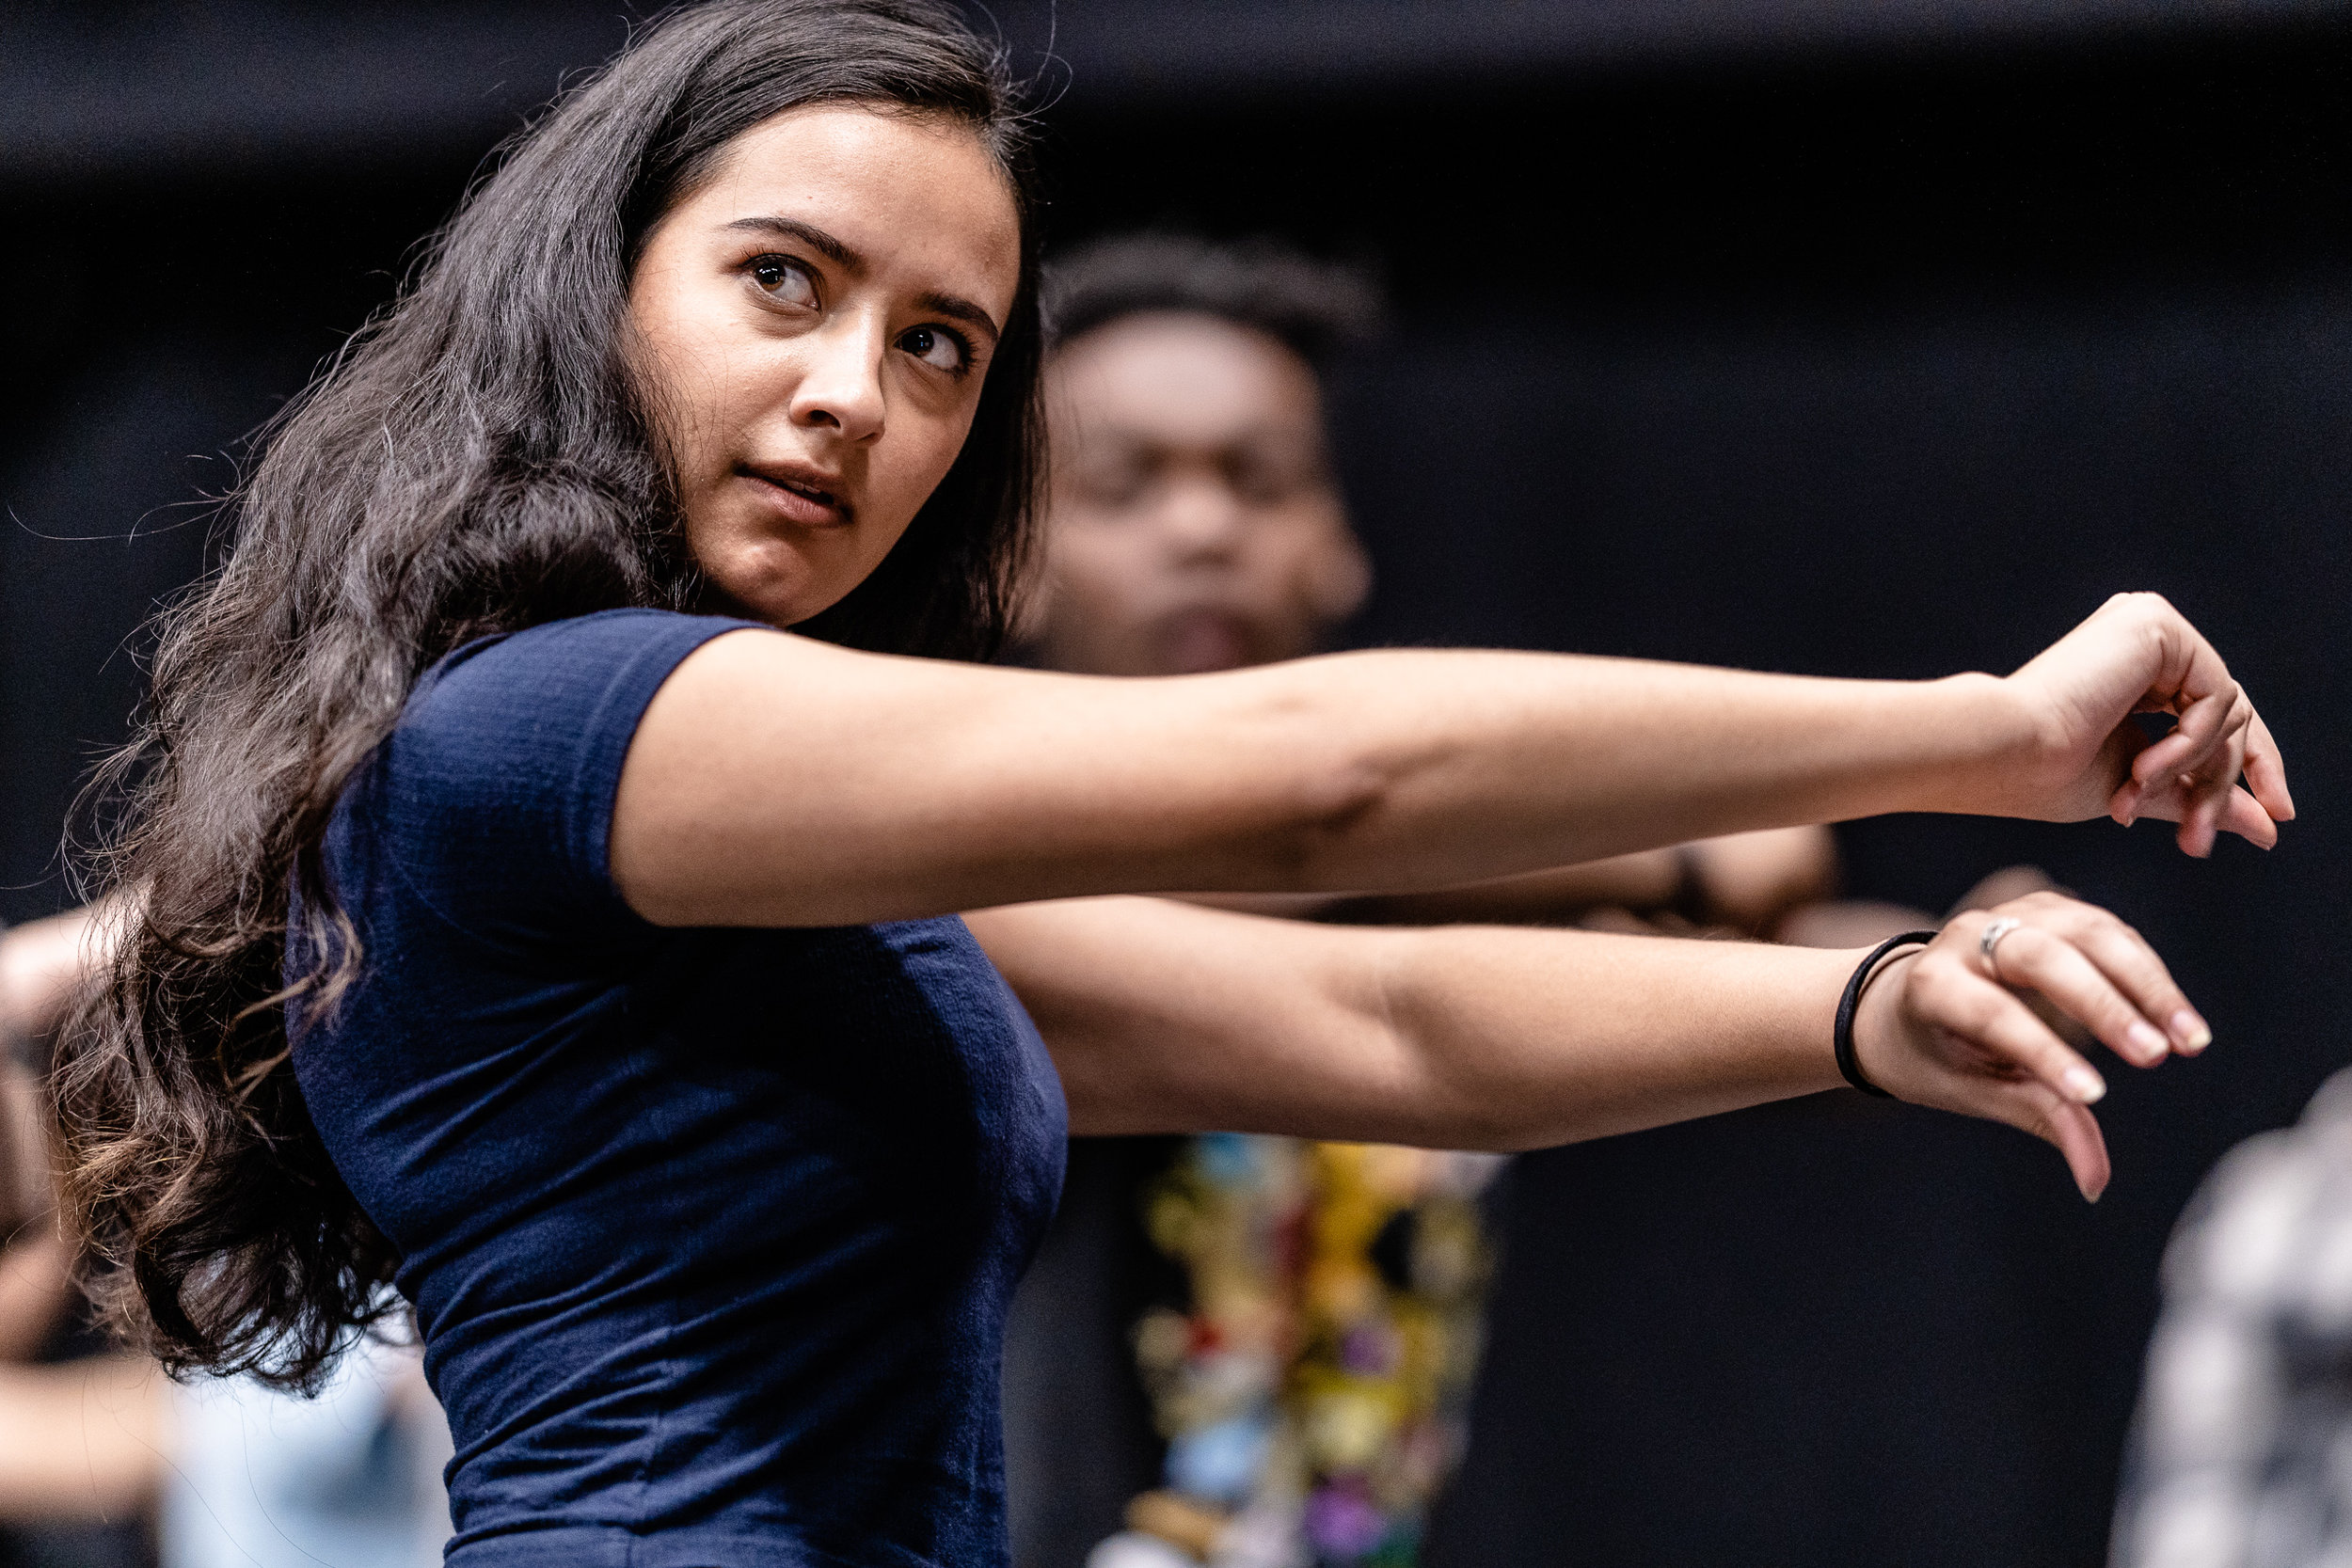  Julia Michelle, 26, an SMC Theatre Arts major from Umeå, Sweden, rehearses flamenco choreography for her role as Lady Macbeth in the SMC production of Flamenco Macbeth at the SMC Studio Stage on Thursday, March 21, 2019. As soon as this dance rehear